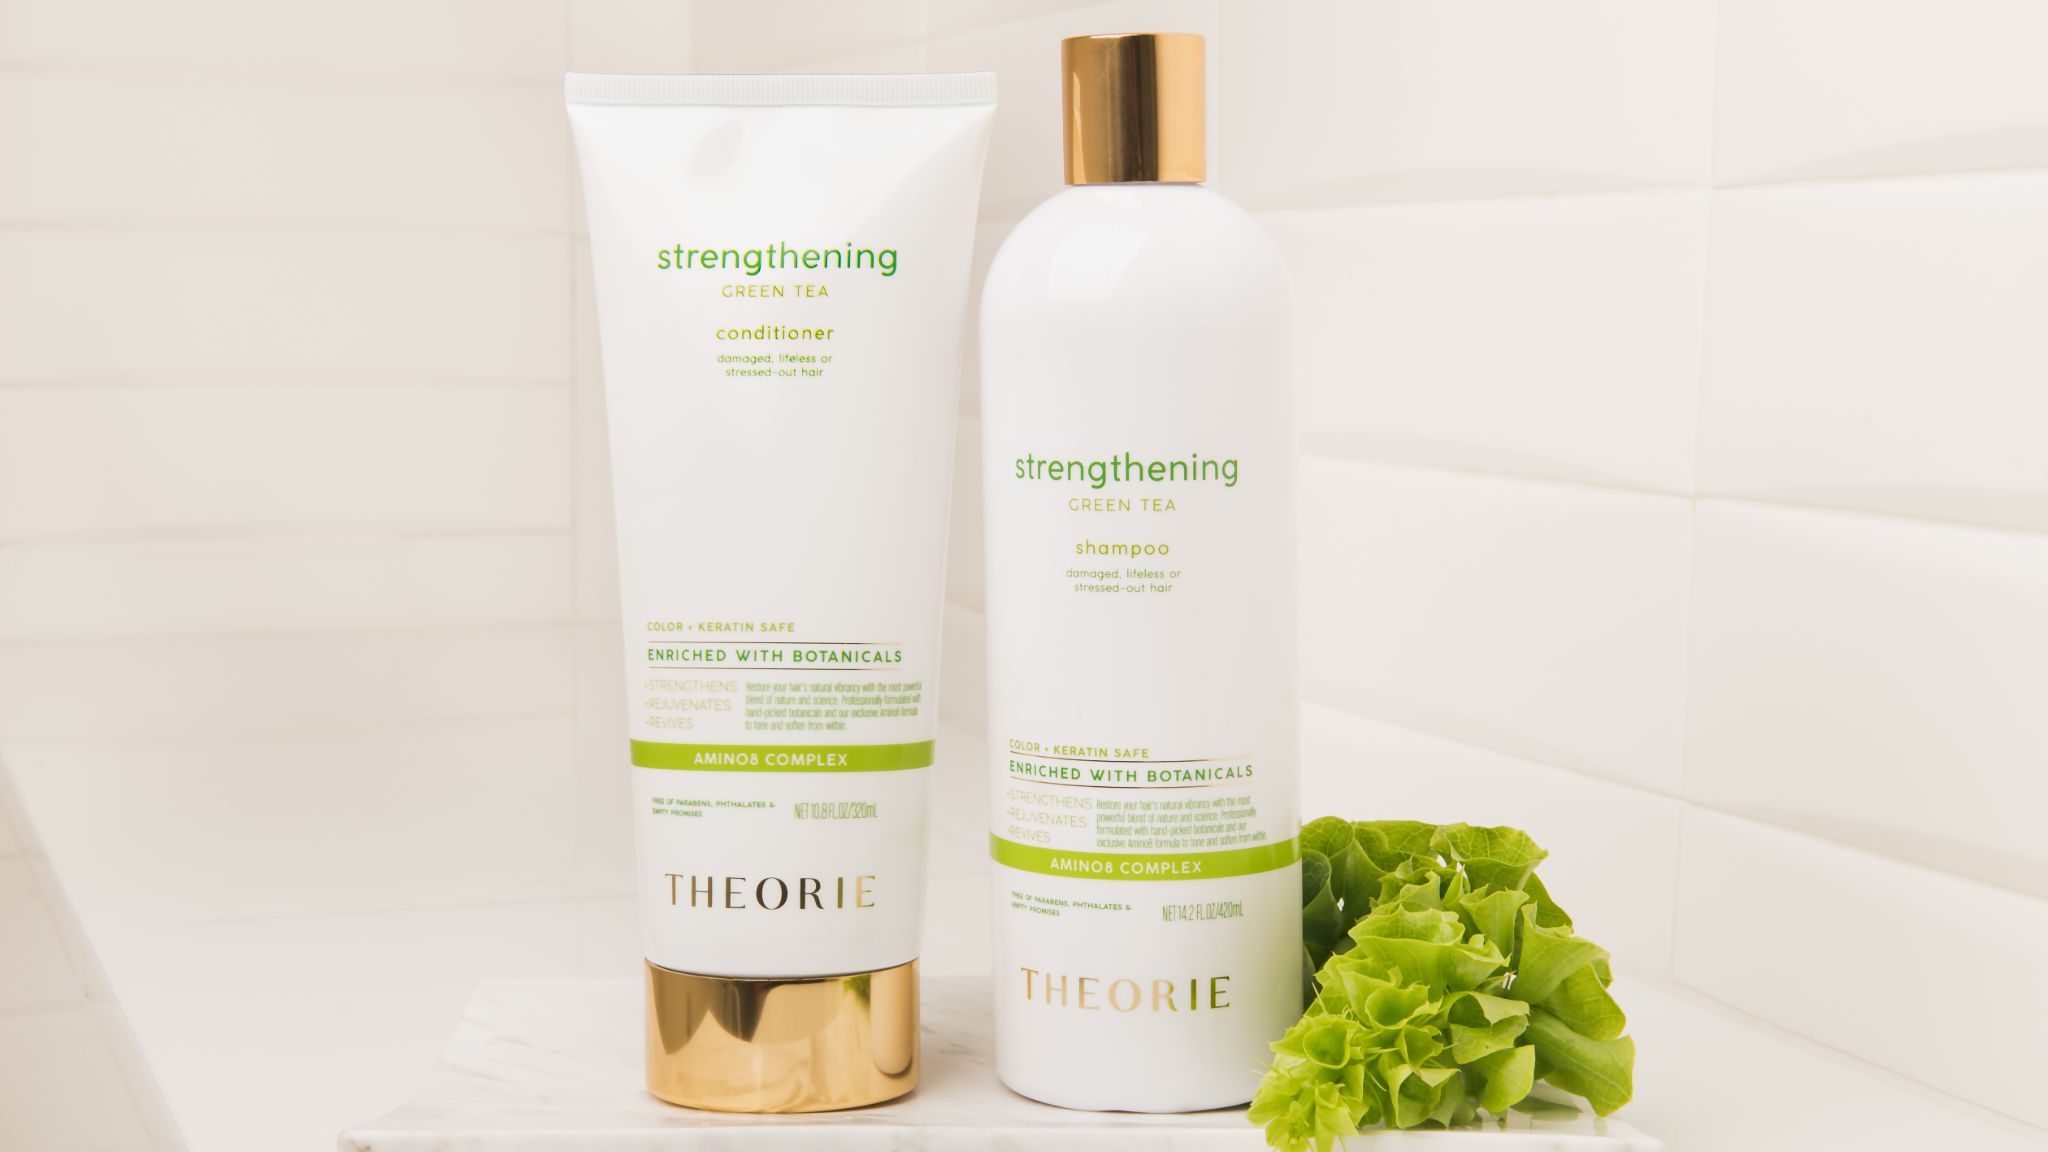 Green tea shampoo and conditioner containers